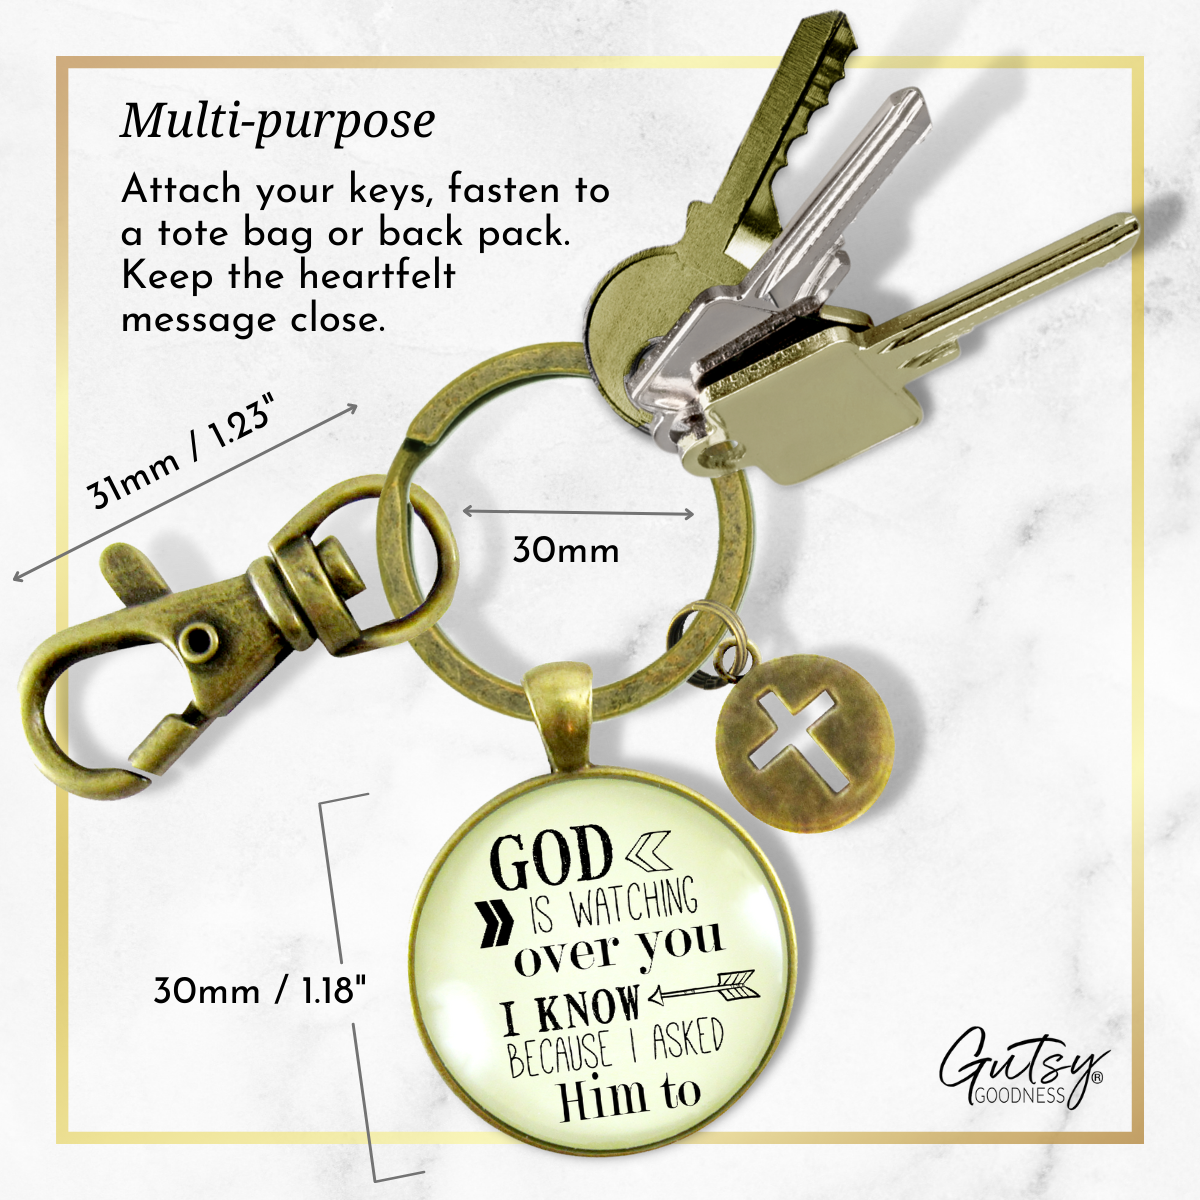 Faith Key Chain He Is Watching Over You Men Women Vintage Bronze Key Ring - Gutsy Goodness Handmade Jewelry;Faith Key Chain He Is Watching Over You Men Women Vintage Bronze Key Ring - Gutsy Goodness Handmade Jewelry Gifts